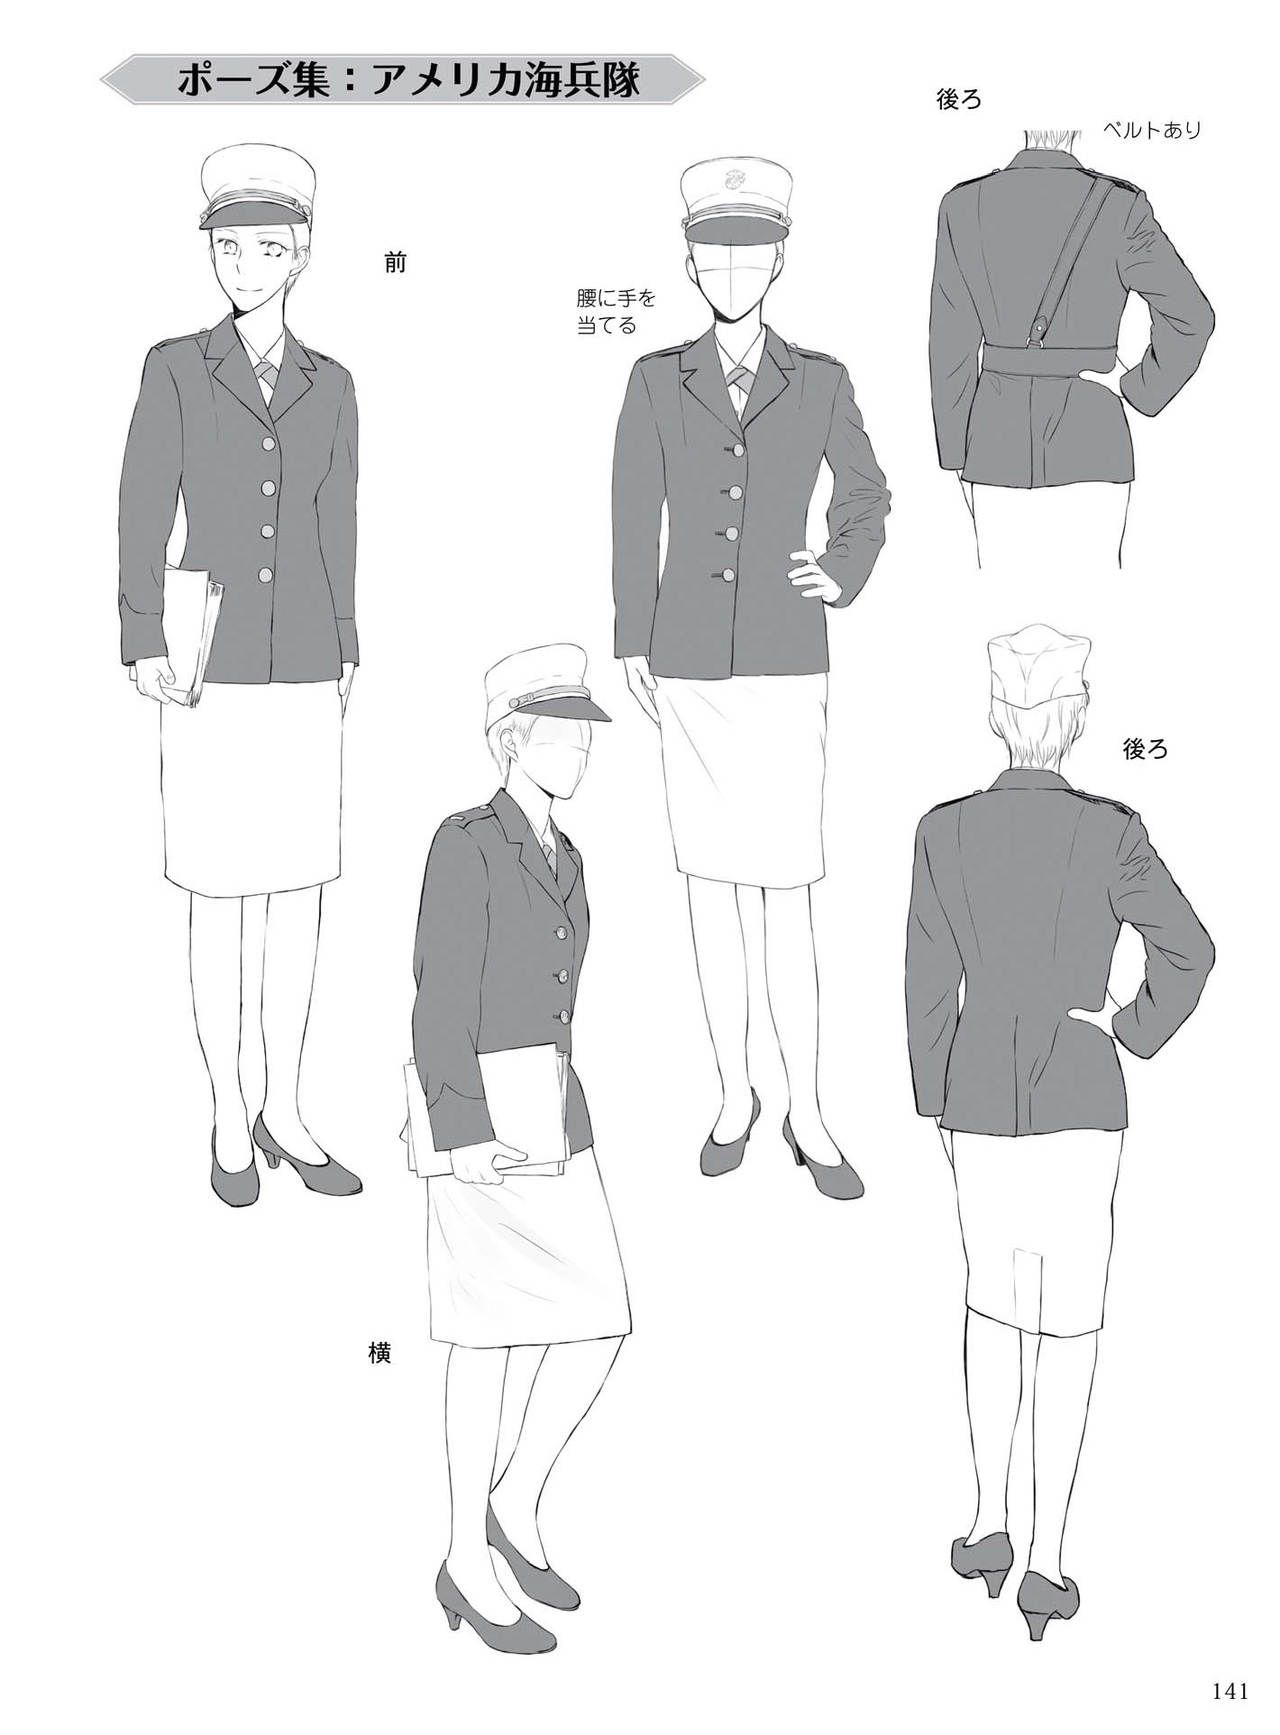 How to draw military uniforms and uniforms From Self-Defense Forces 軍服・制服の描き方 アメリカ軍・自衛隊の制服から戦闘服まで 144